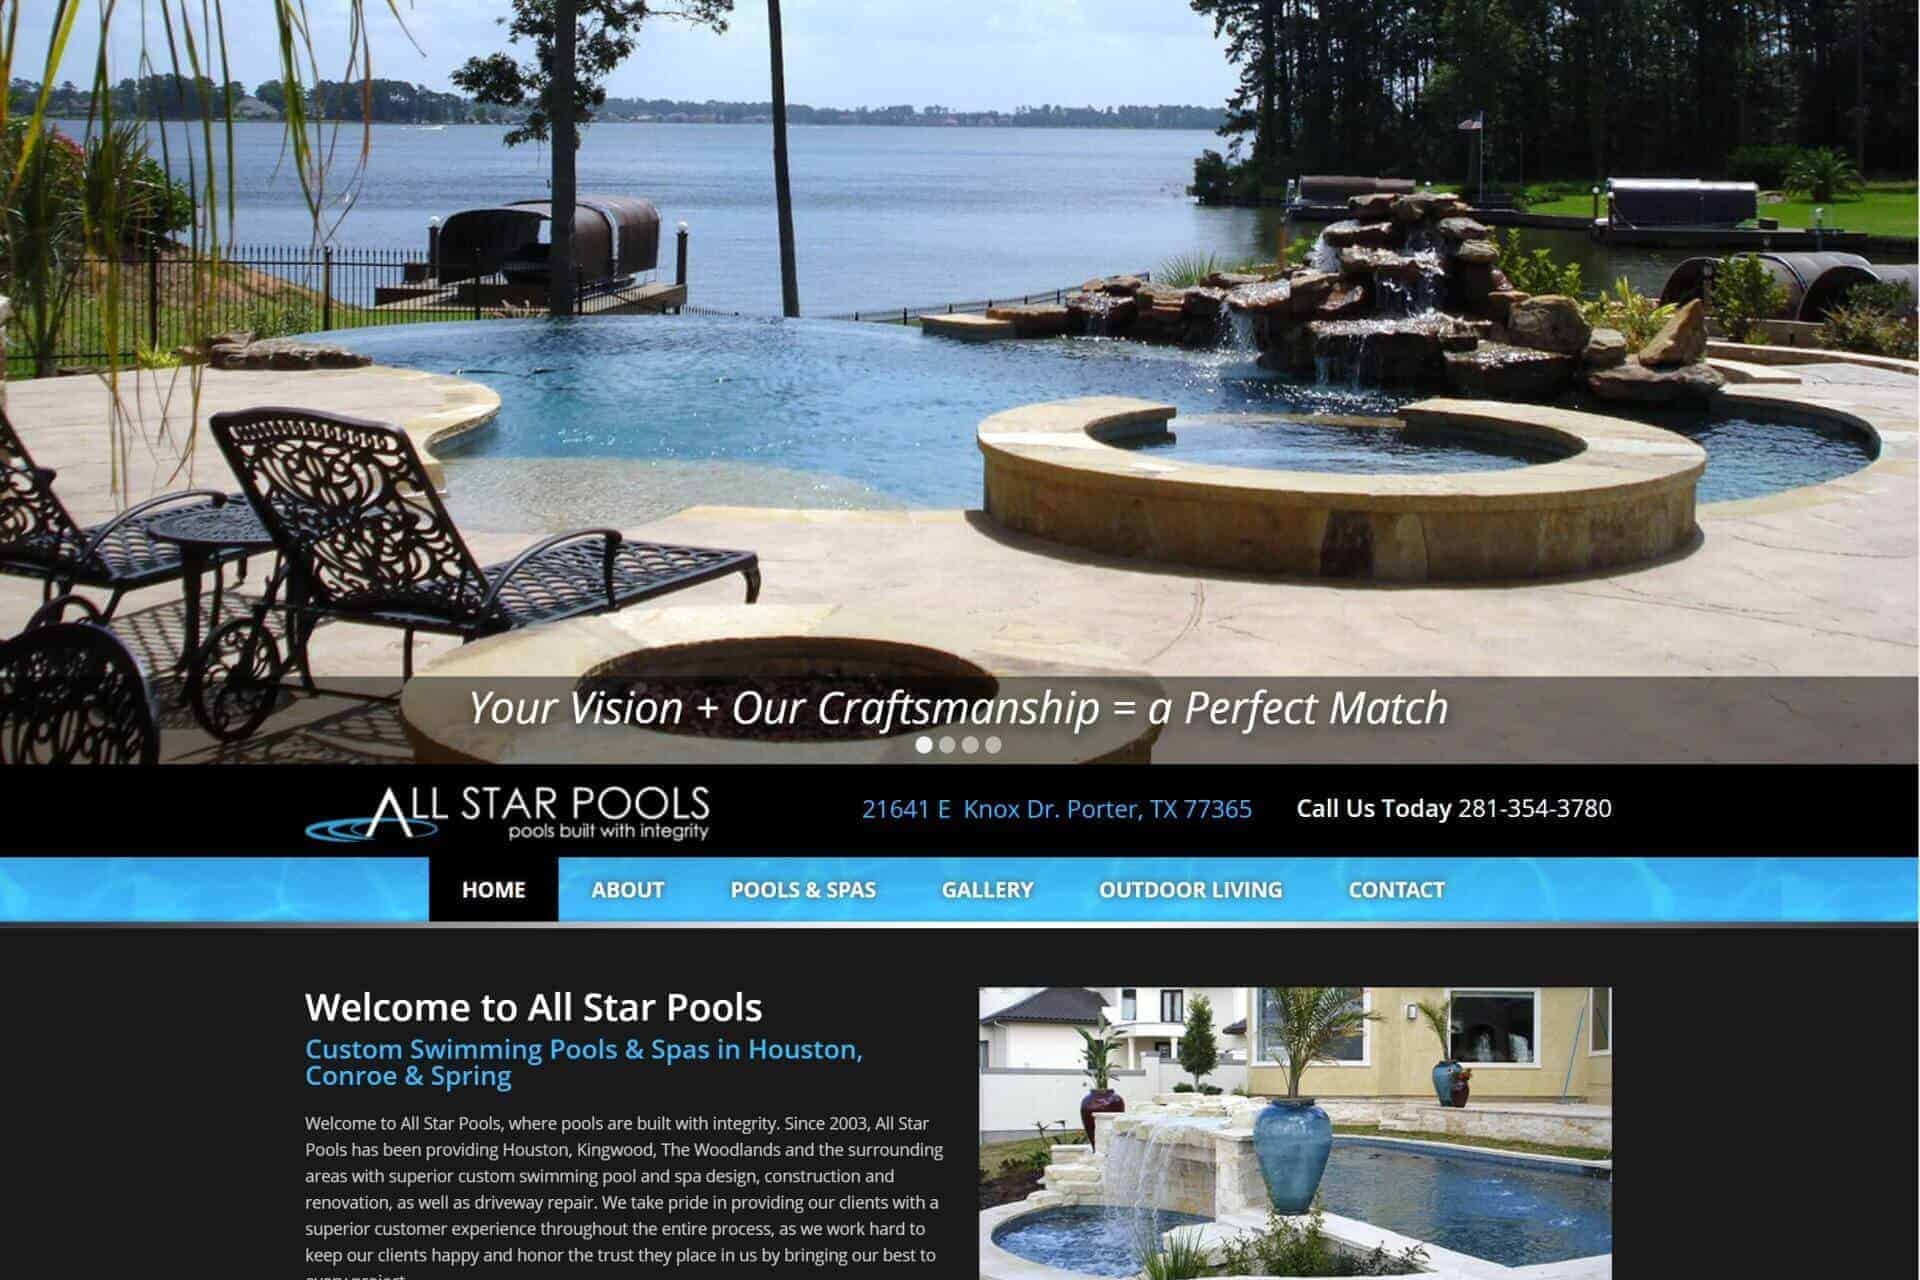 All Star Pools by Village Physicians